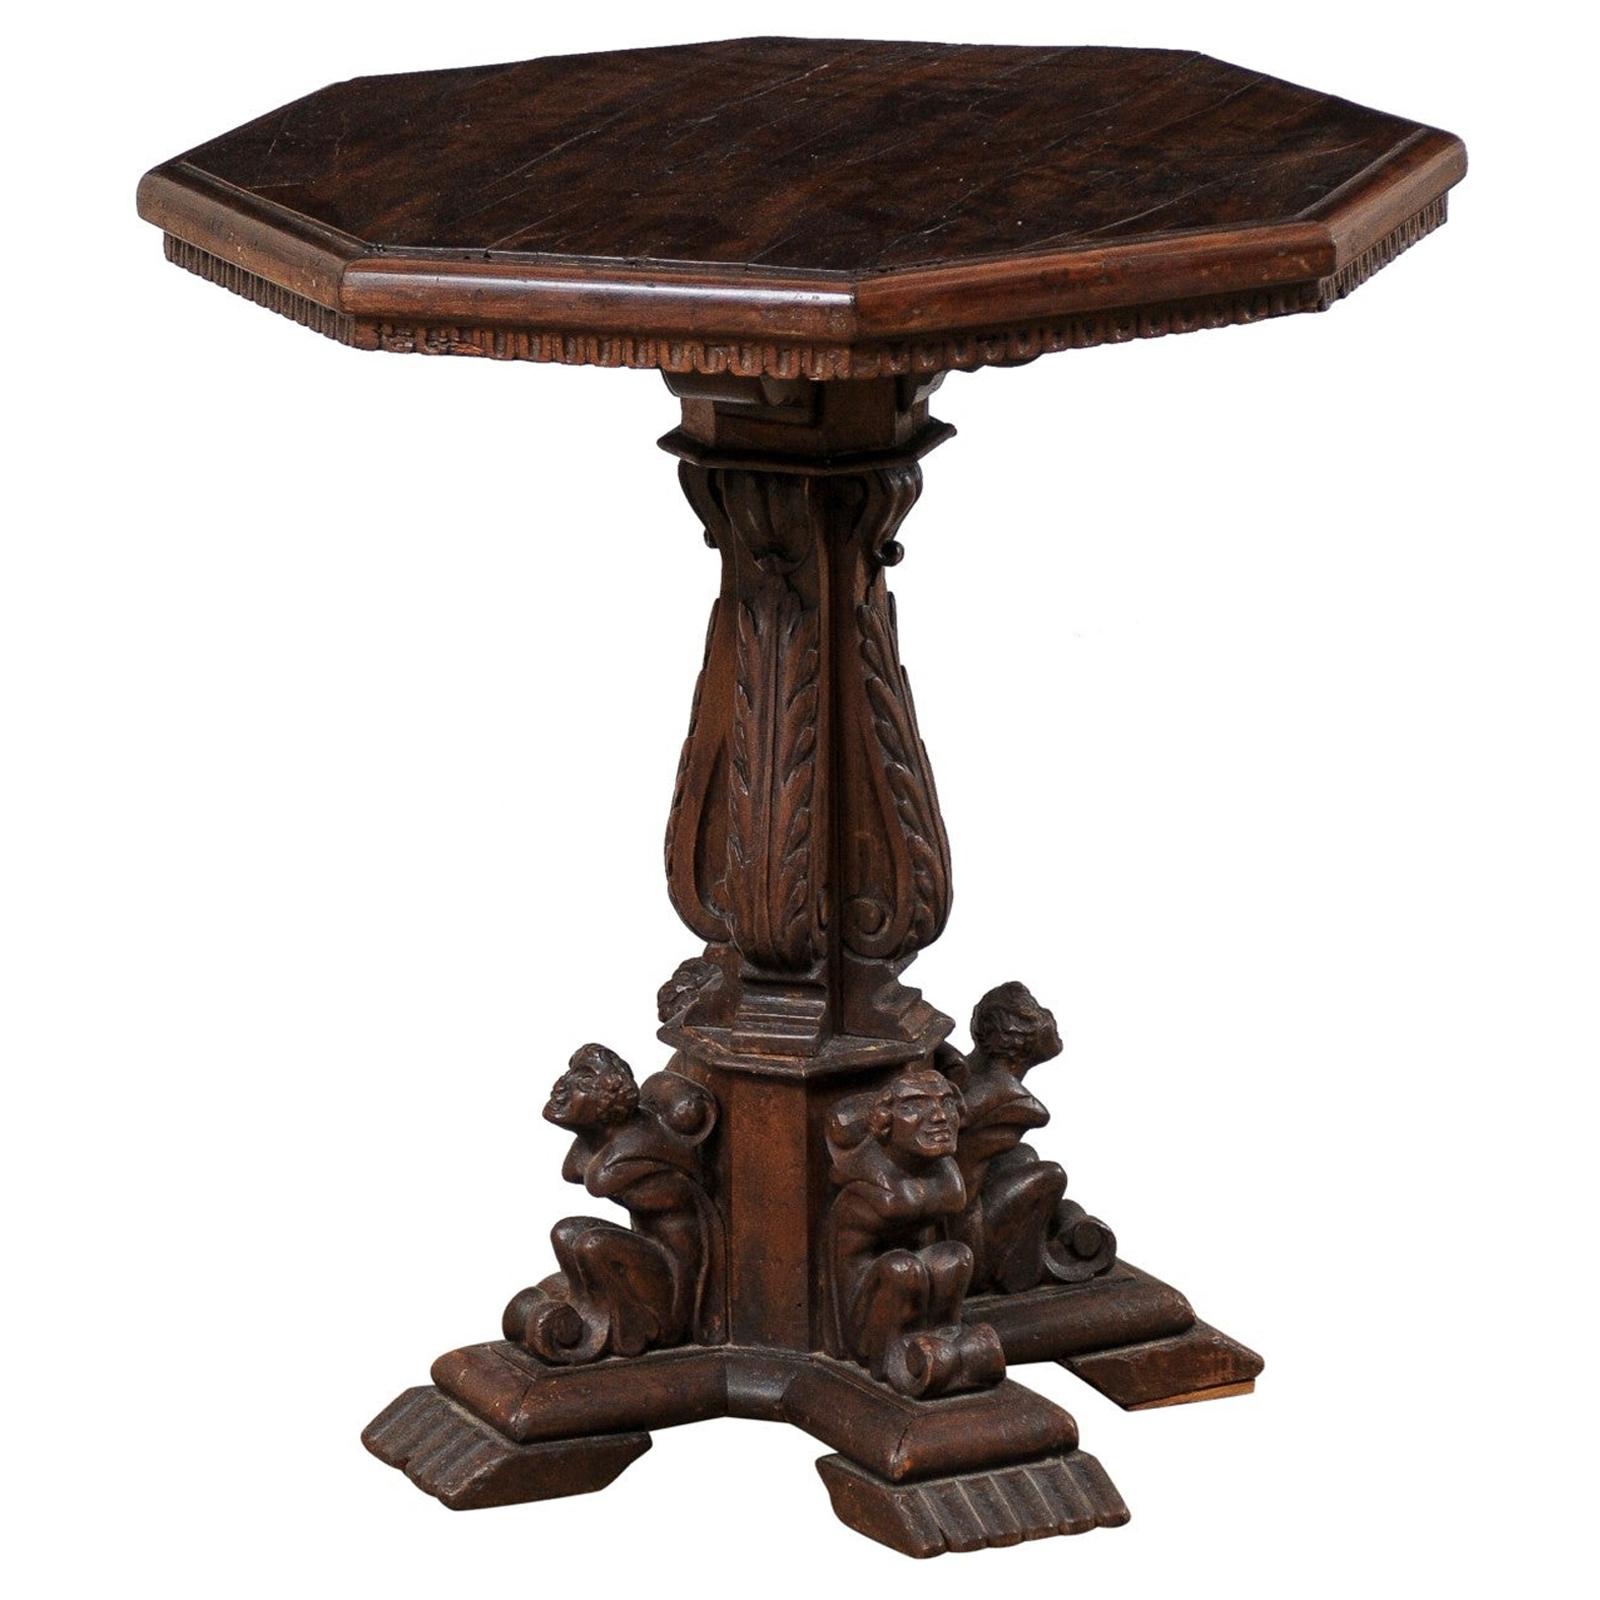 Italian Small Pedestal Table w/Carved Figures & Octagon Top, Early 19th C